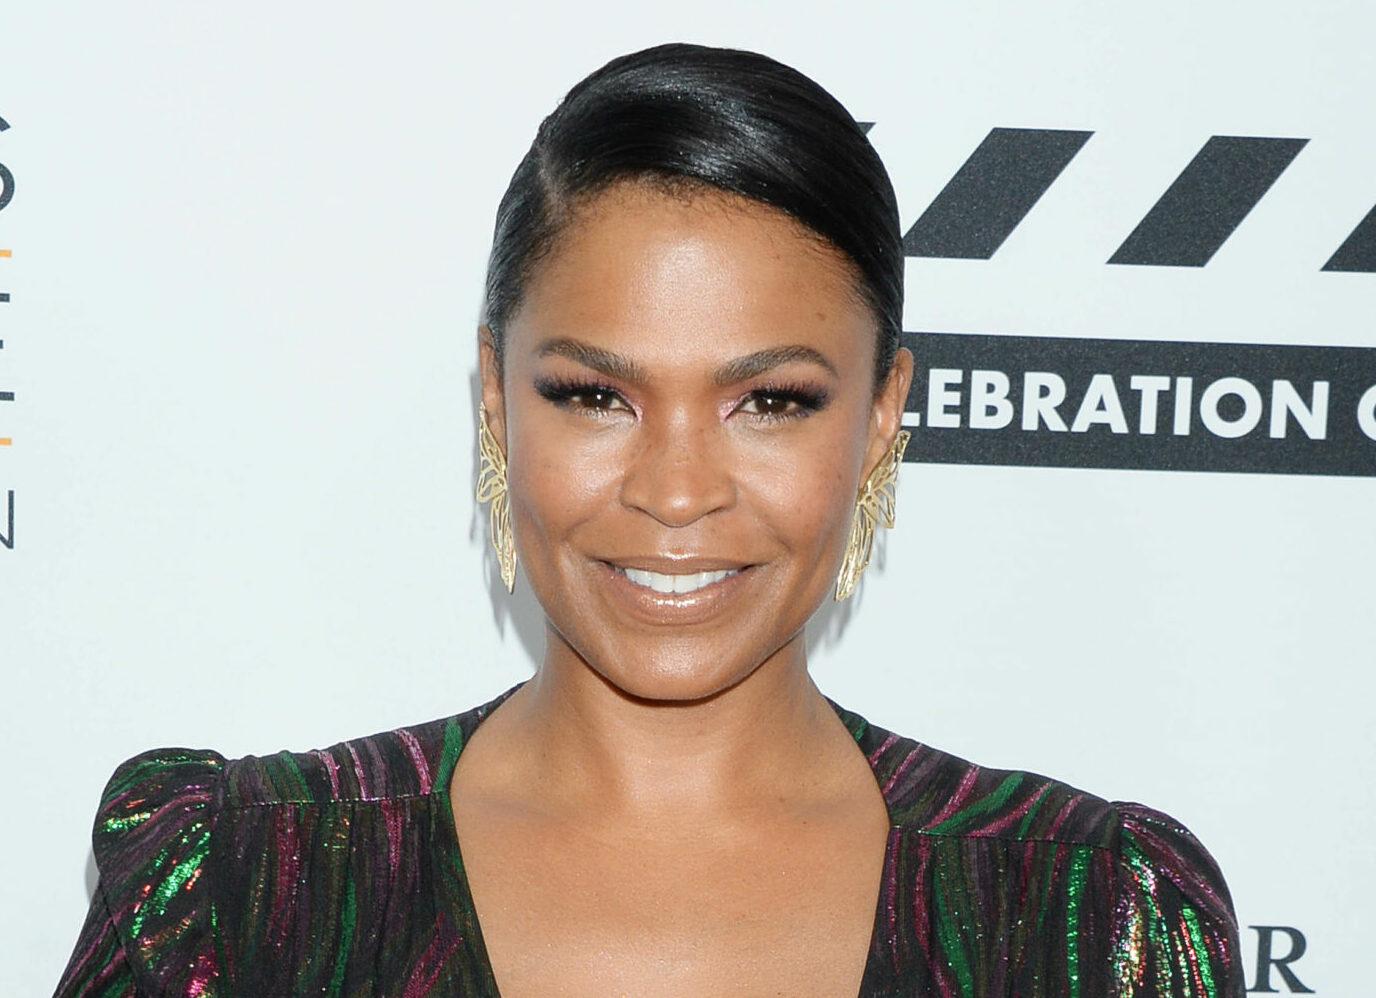 Nia Long On Being Seen As 'Ageless' And The Pressure It Brings